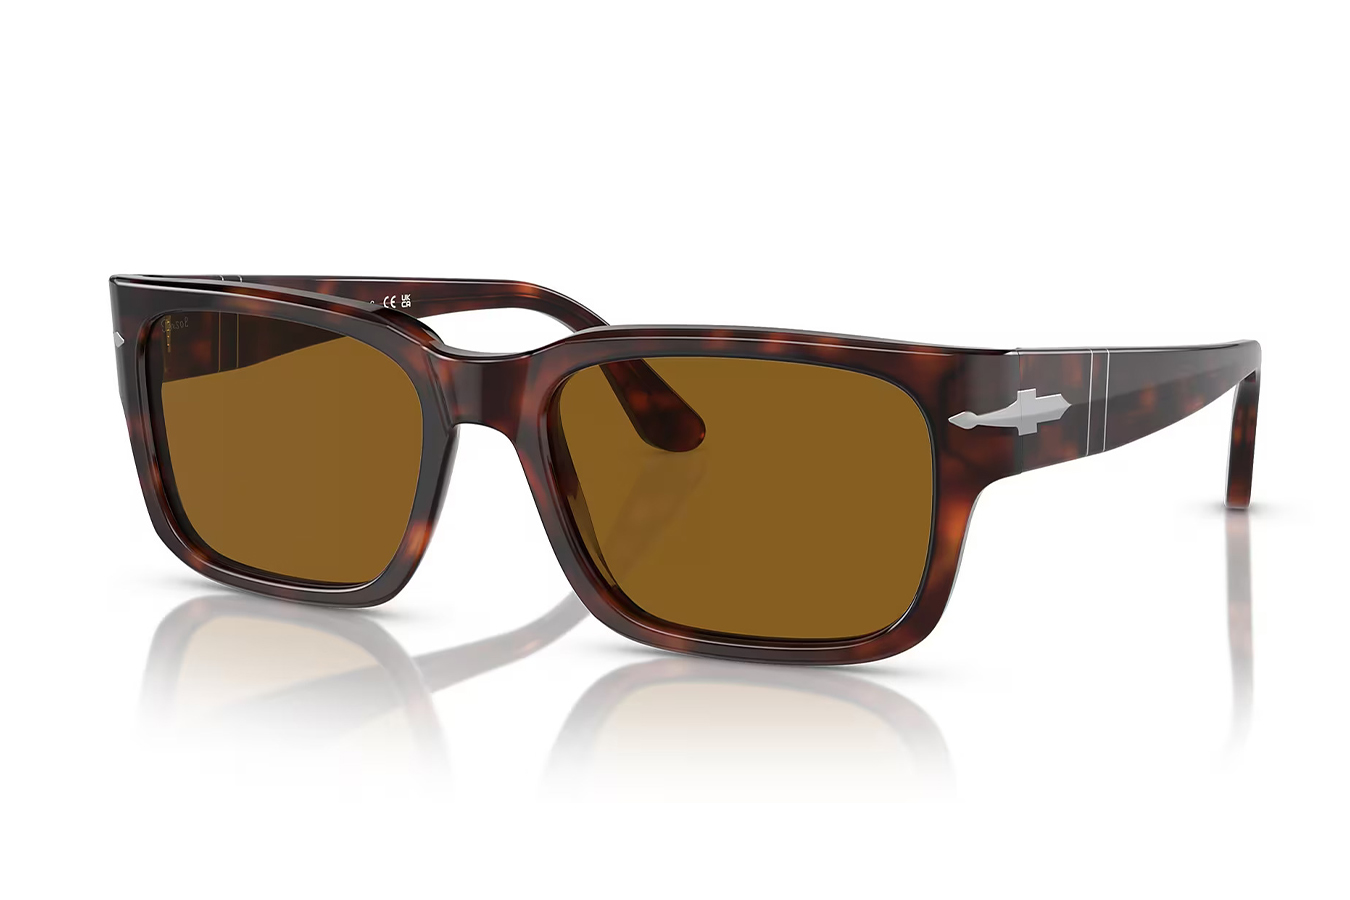 Persol PO3315S Sunglasses with Havana Frames and Brown Lenses ...